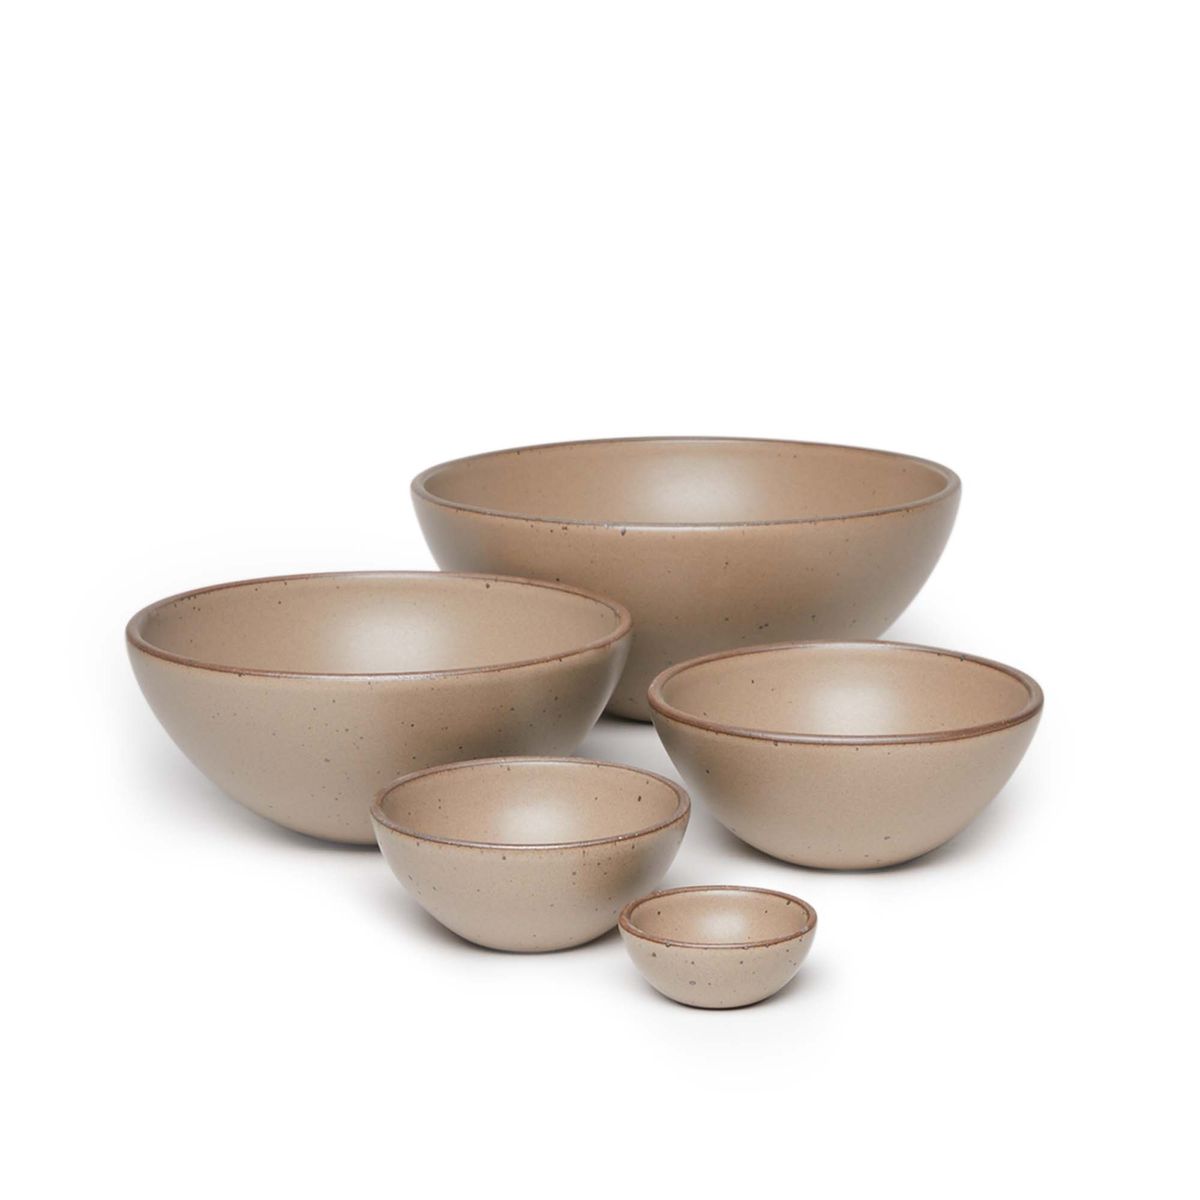 A bitty bowl, ice cream bowl, soup bowl, popcorn bowl, and mixing bowl paired together in a warm pale brown color featuring iron speckles